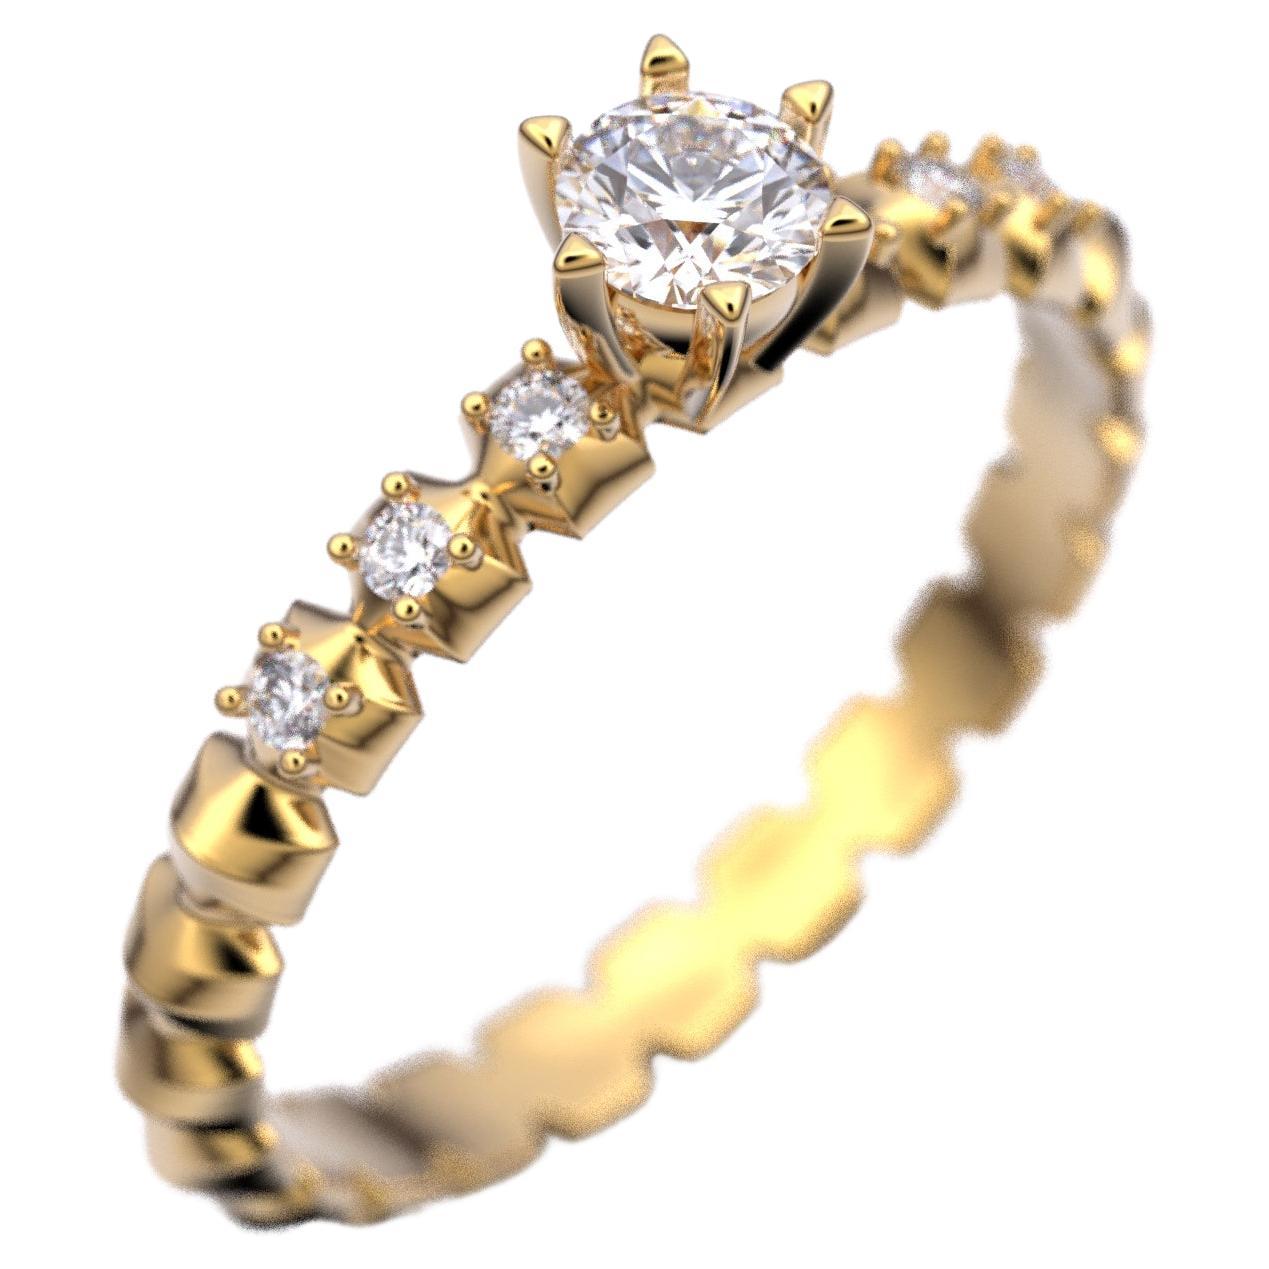 Italian-Made 0.32 Carat Diamond Engagement Ring in 18k Solid Gold